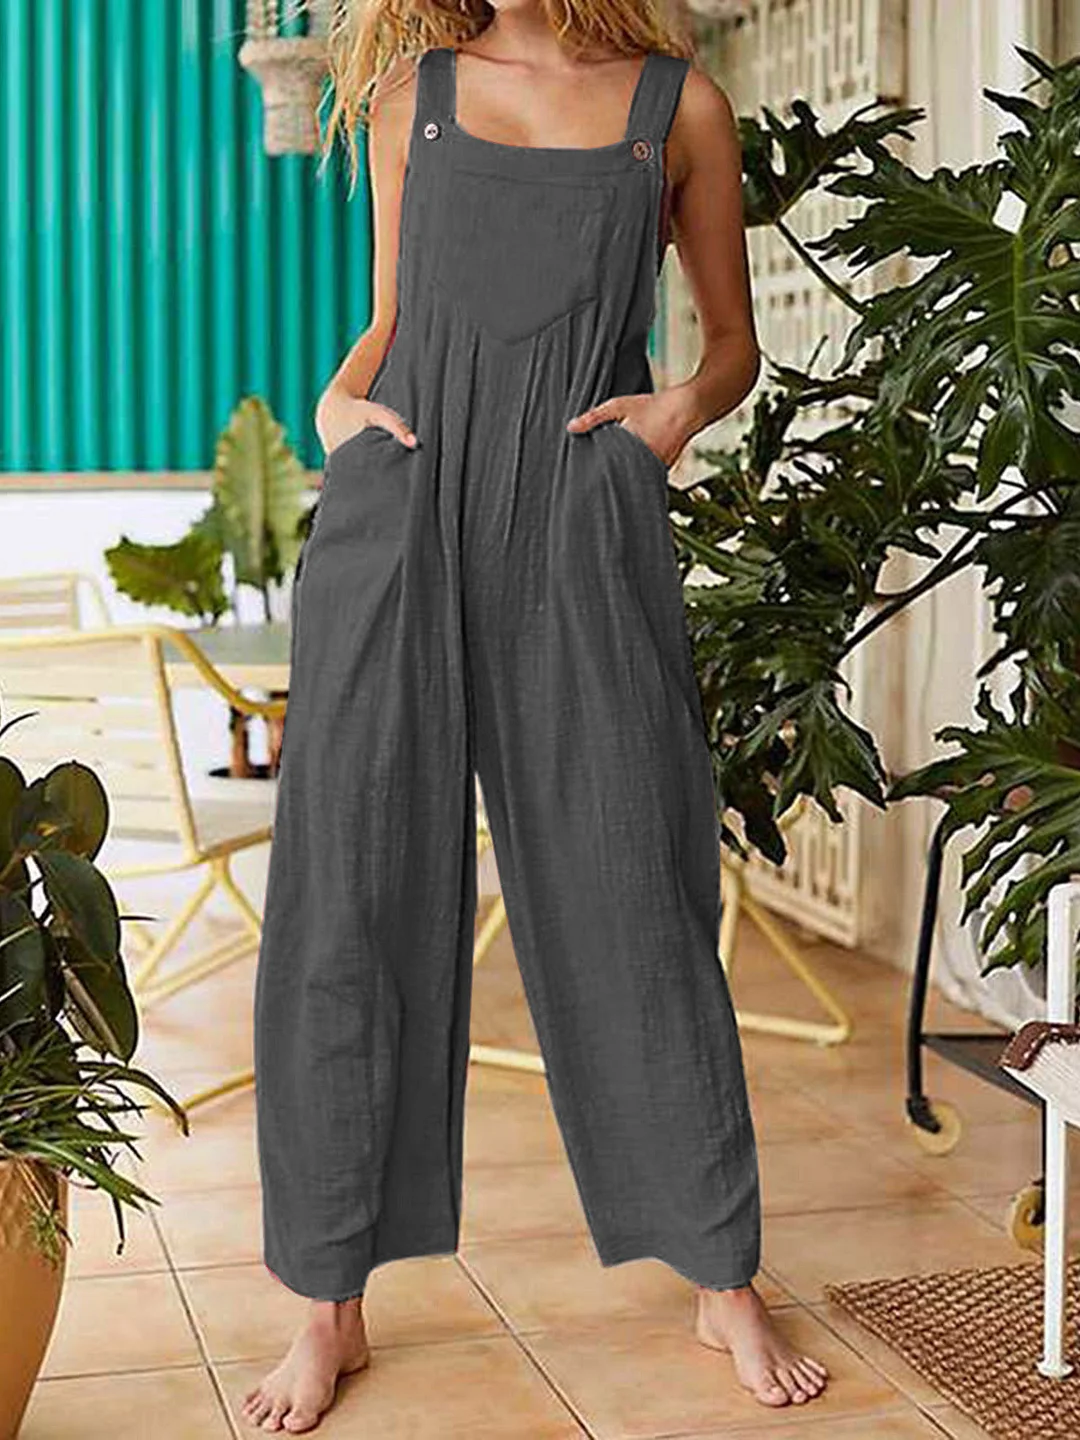 Women plus size clothing Women's Home Wear Solid Color Overalls One-piece Strappy Pants-Nordswear